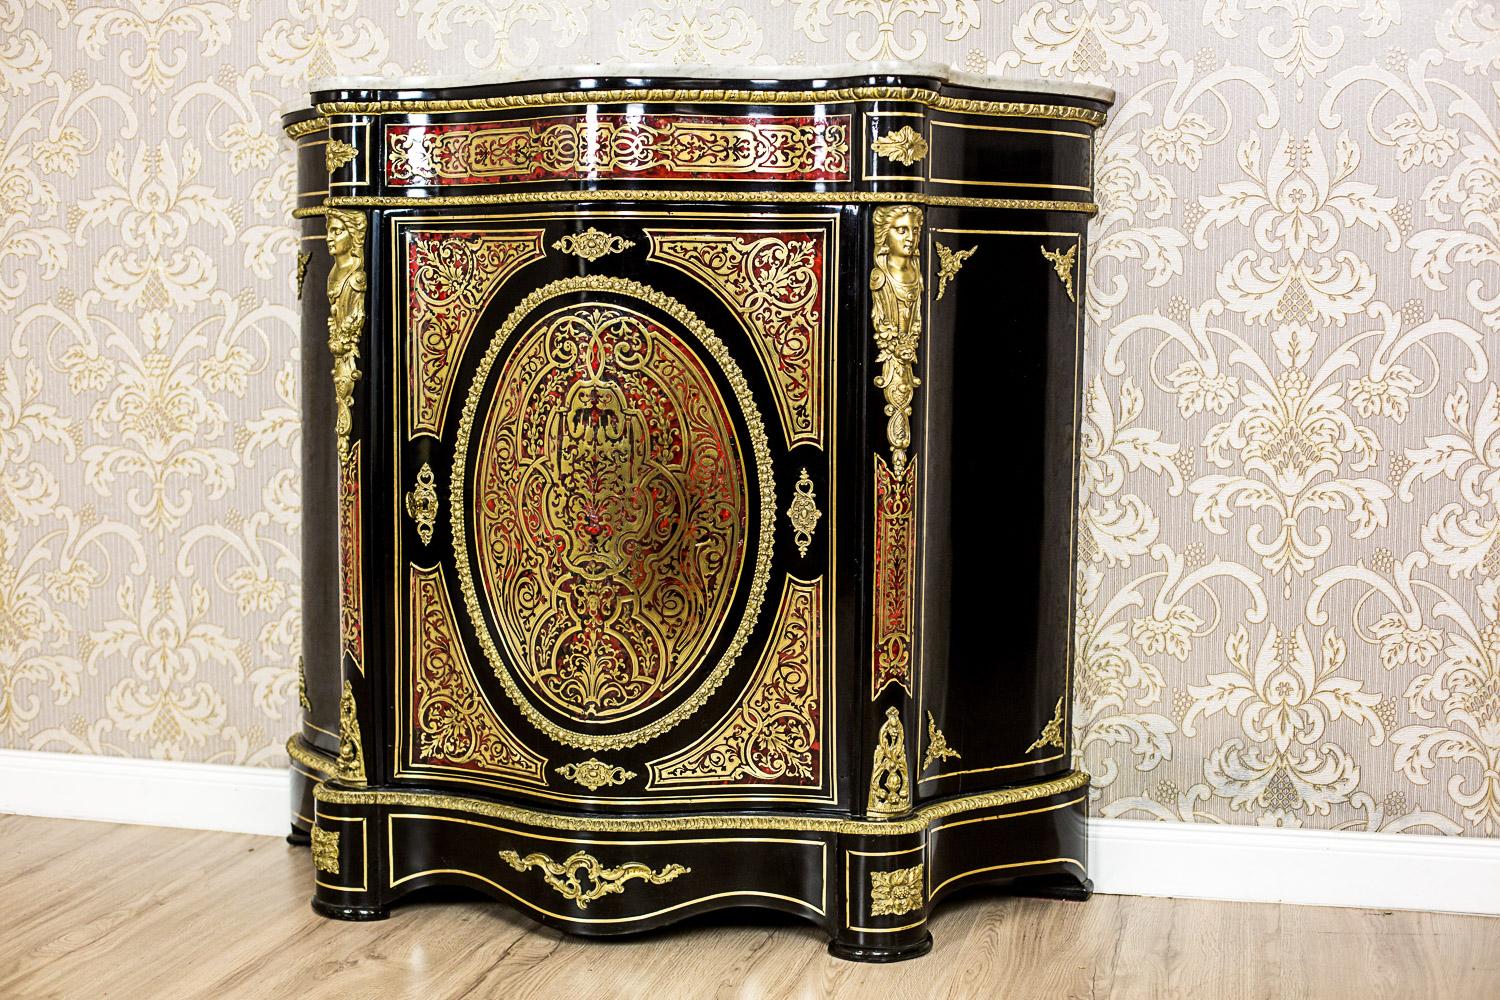 We present you this commode manufactured in the 19th century, in France, modeled on the 17th-century, Baroque furniture of the French ebéniste, A. Ch. Boulle. This piece of furniture is single-door, with sides that are set at the angle of 45 degrees